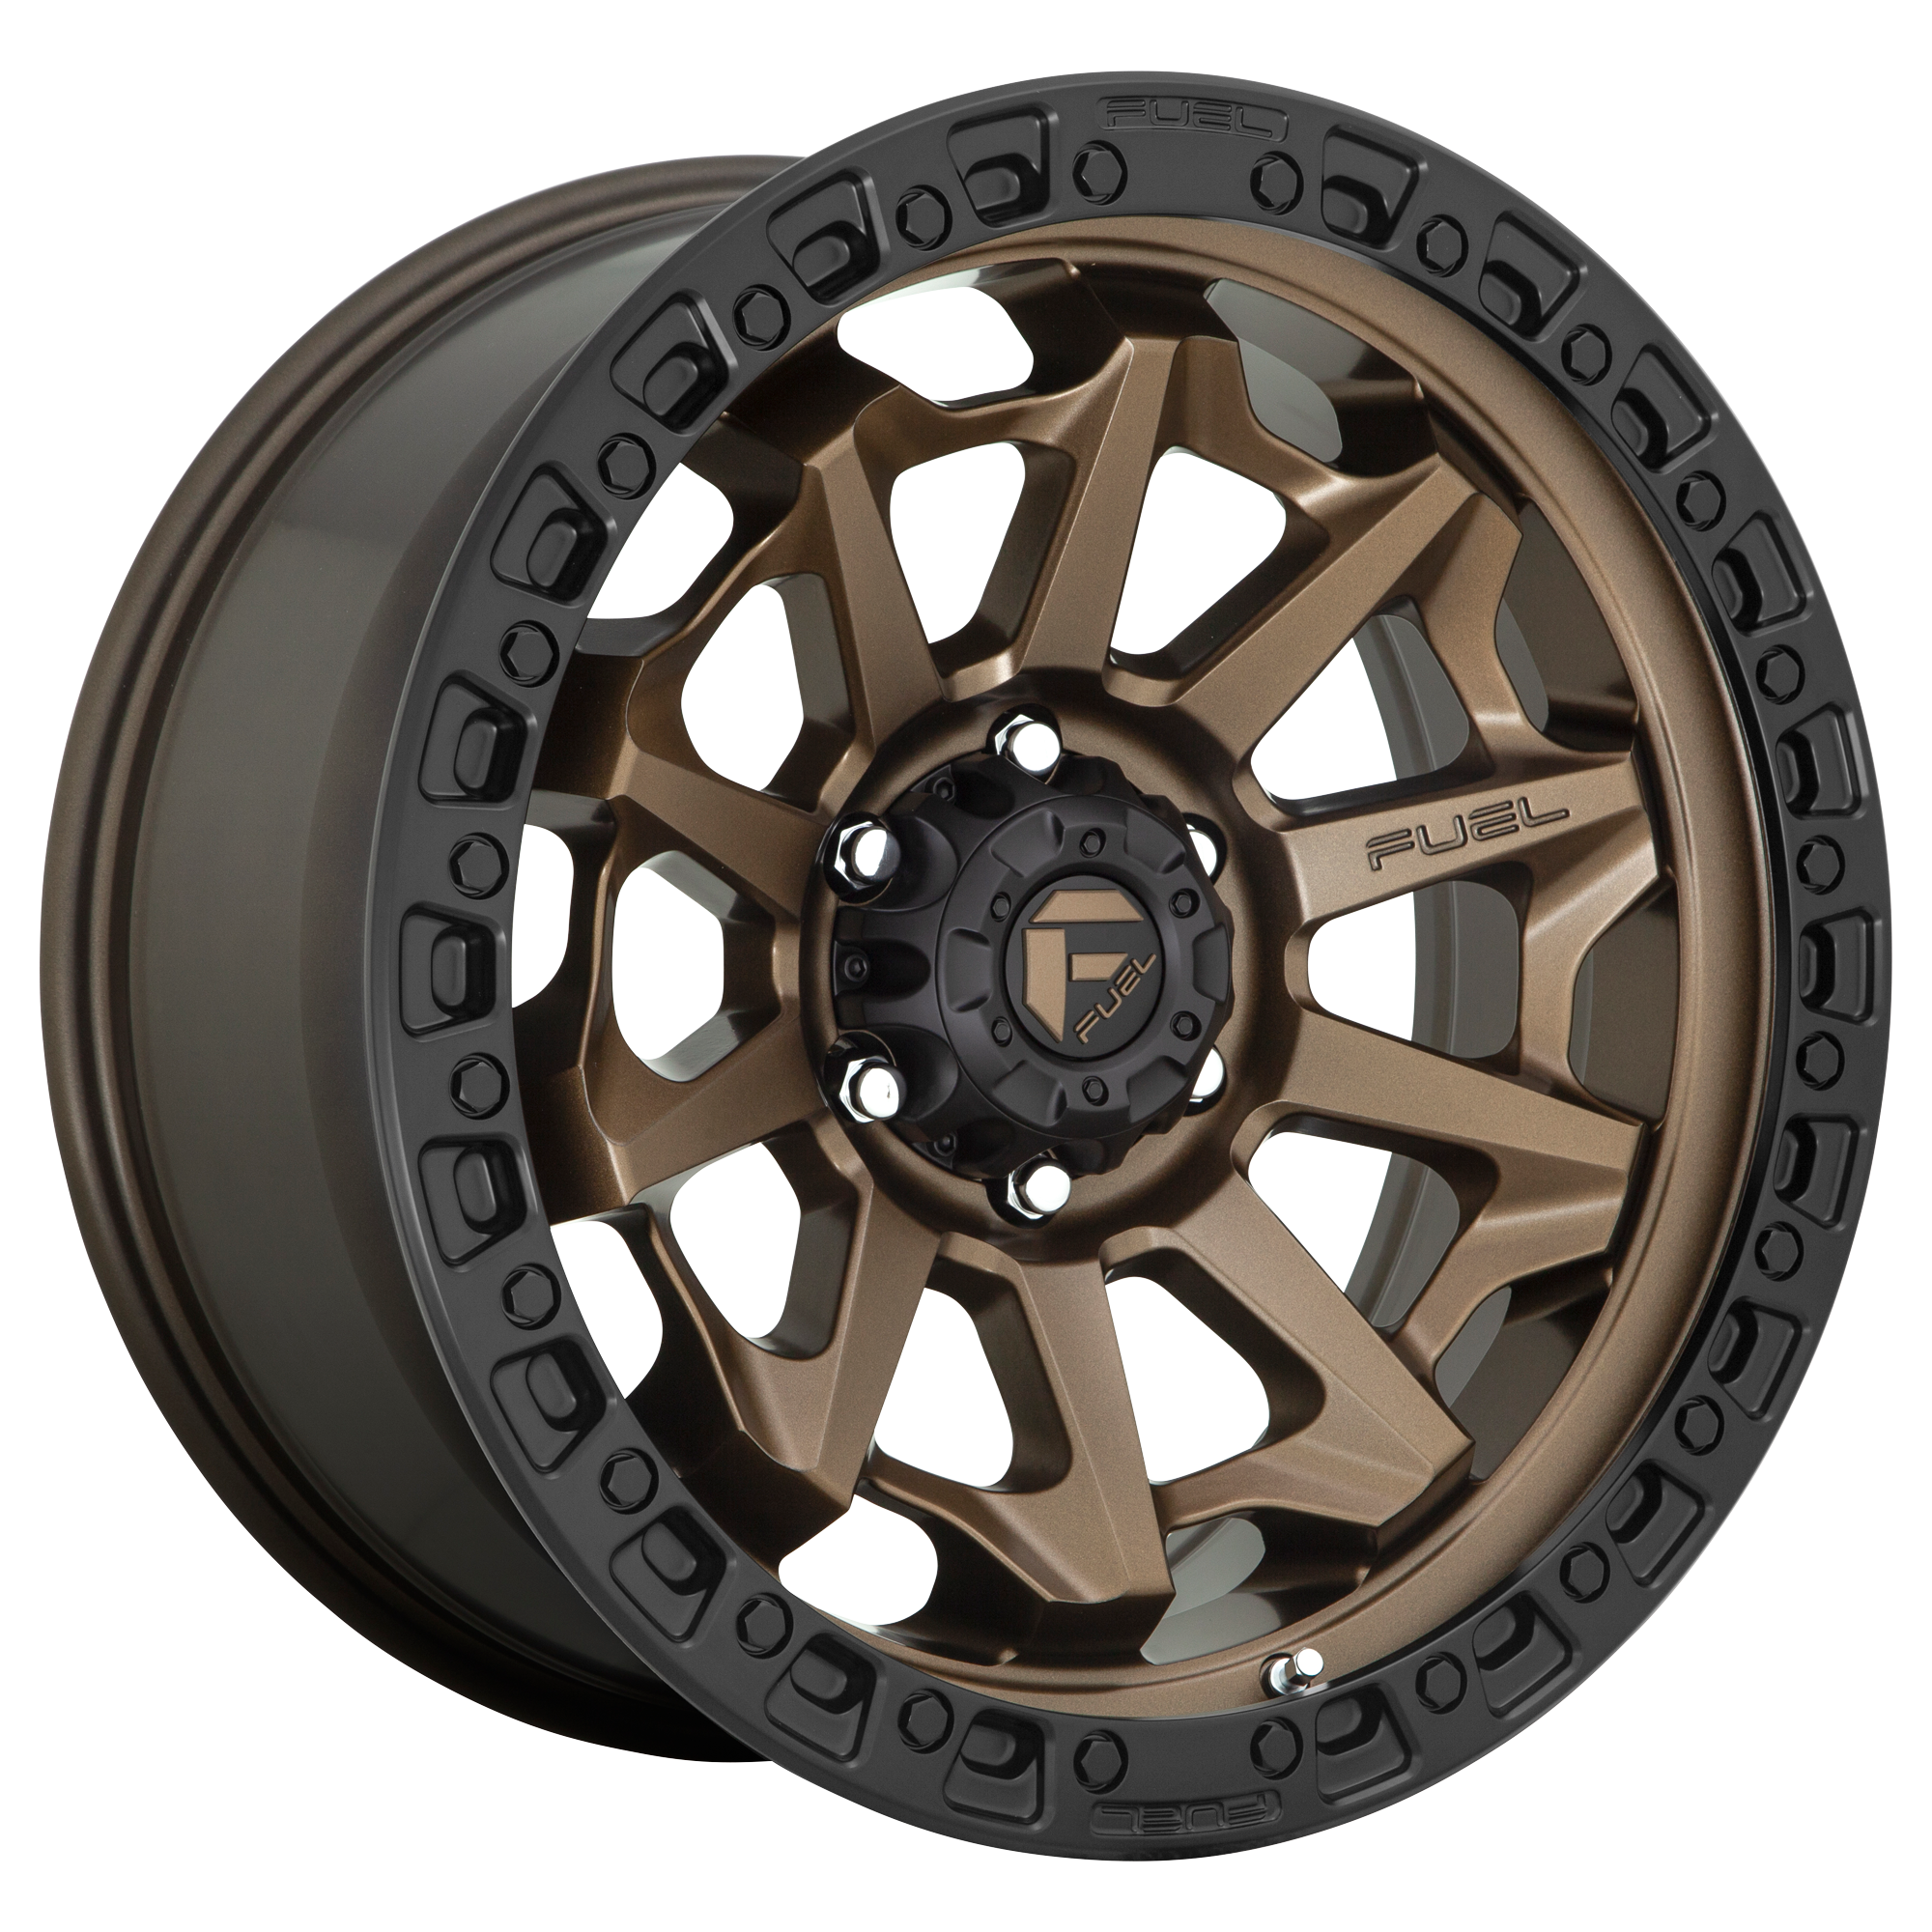 COVERT 17x9 8x180.00 MATTE BRONZE BLACK BEAD RING (1 mm) - Tires and Engine Performance